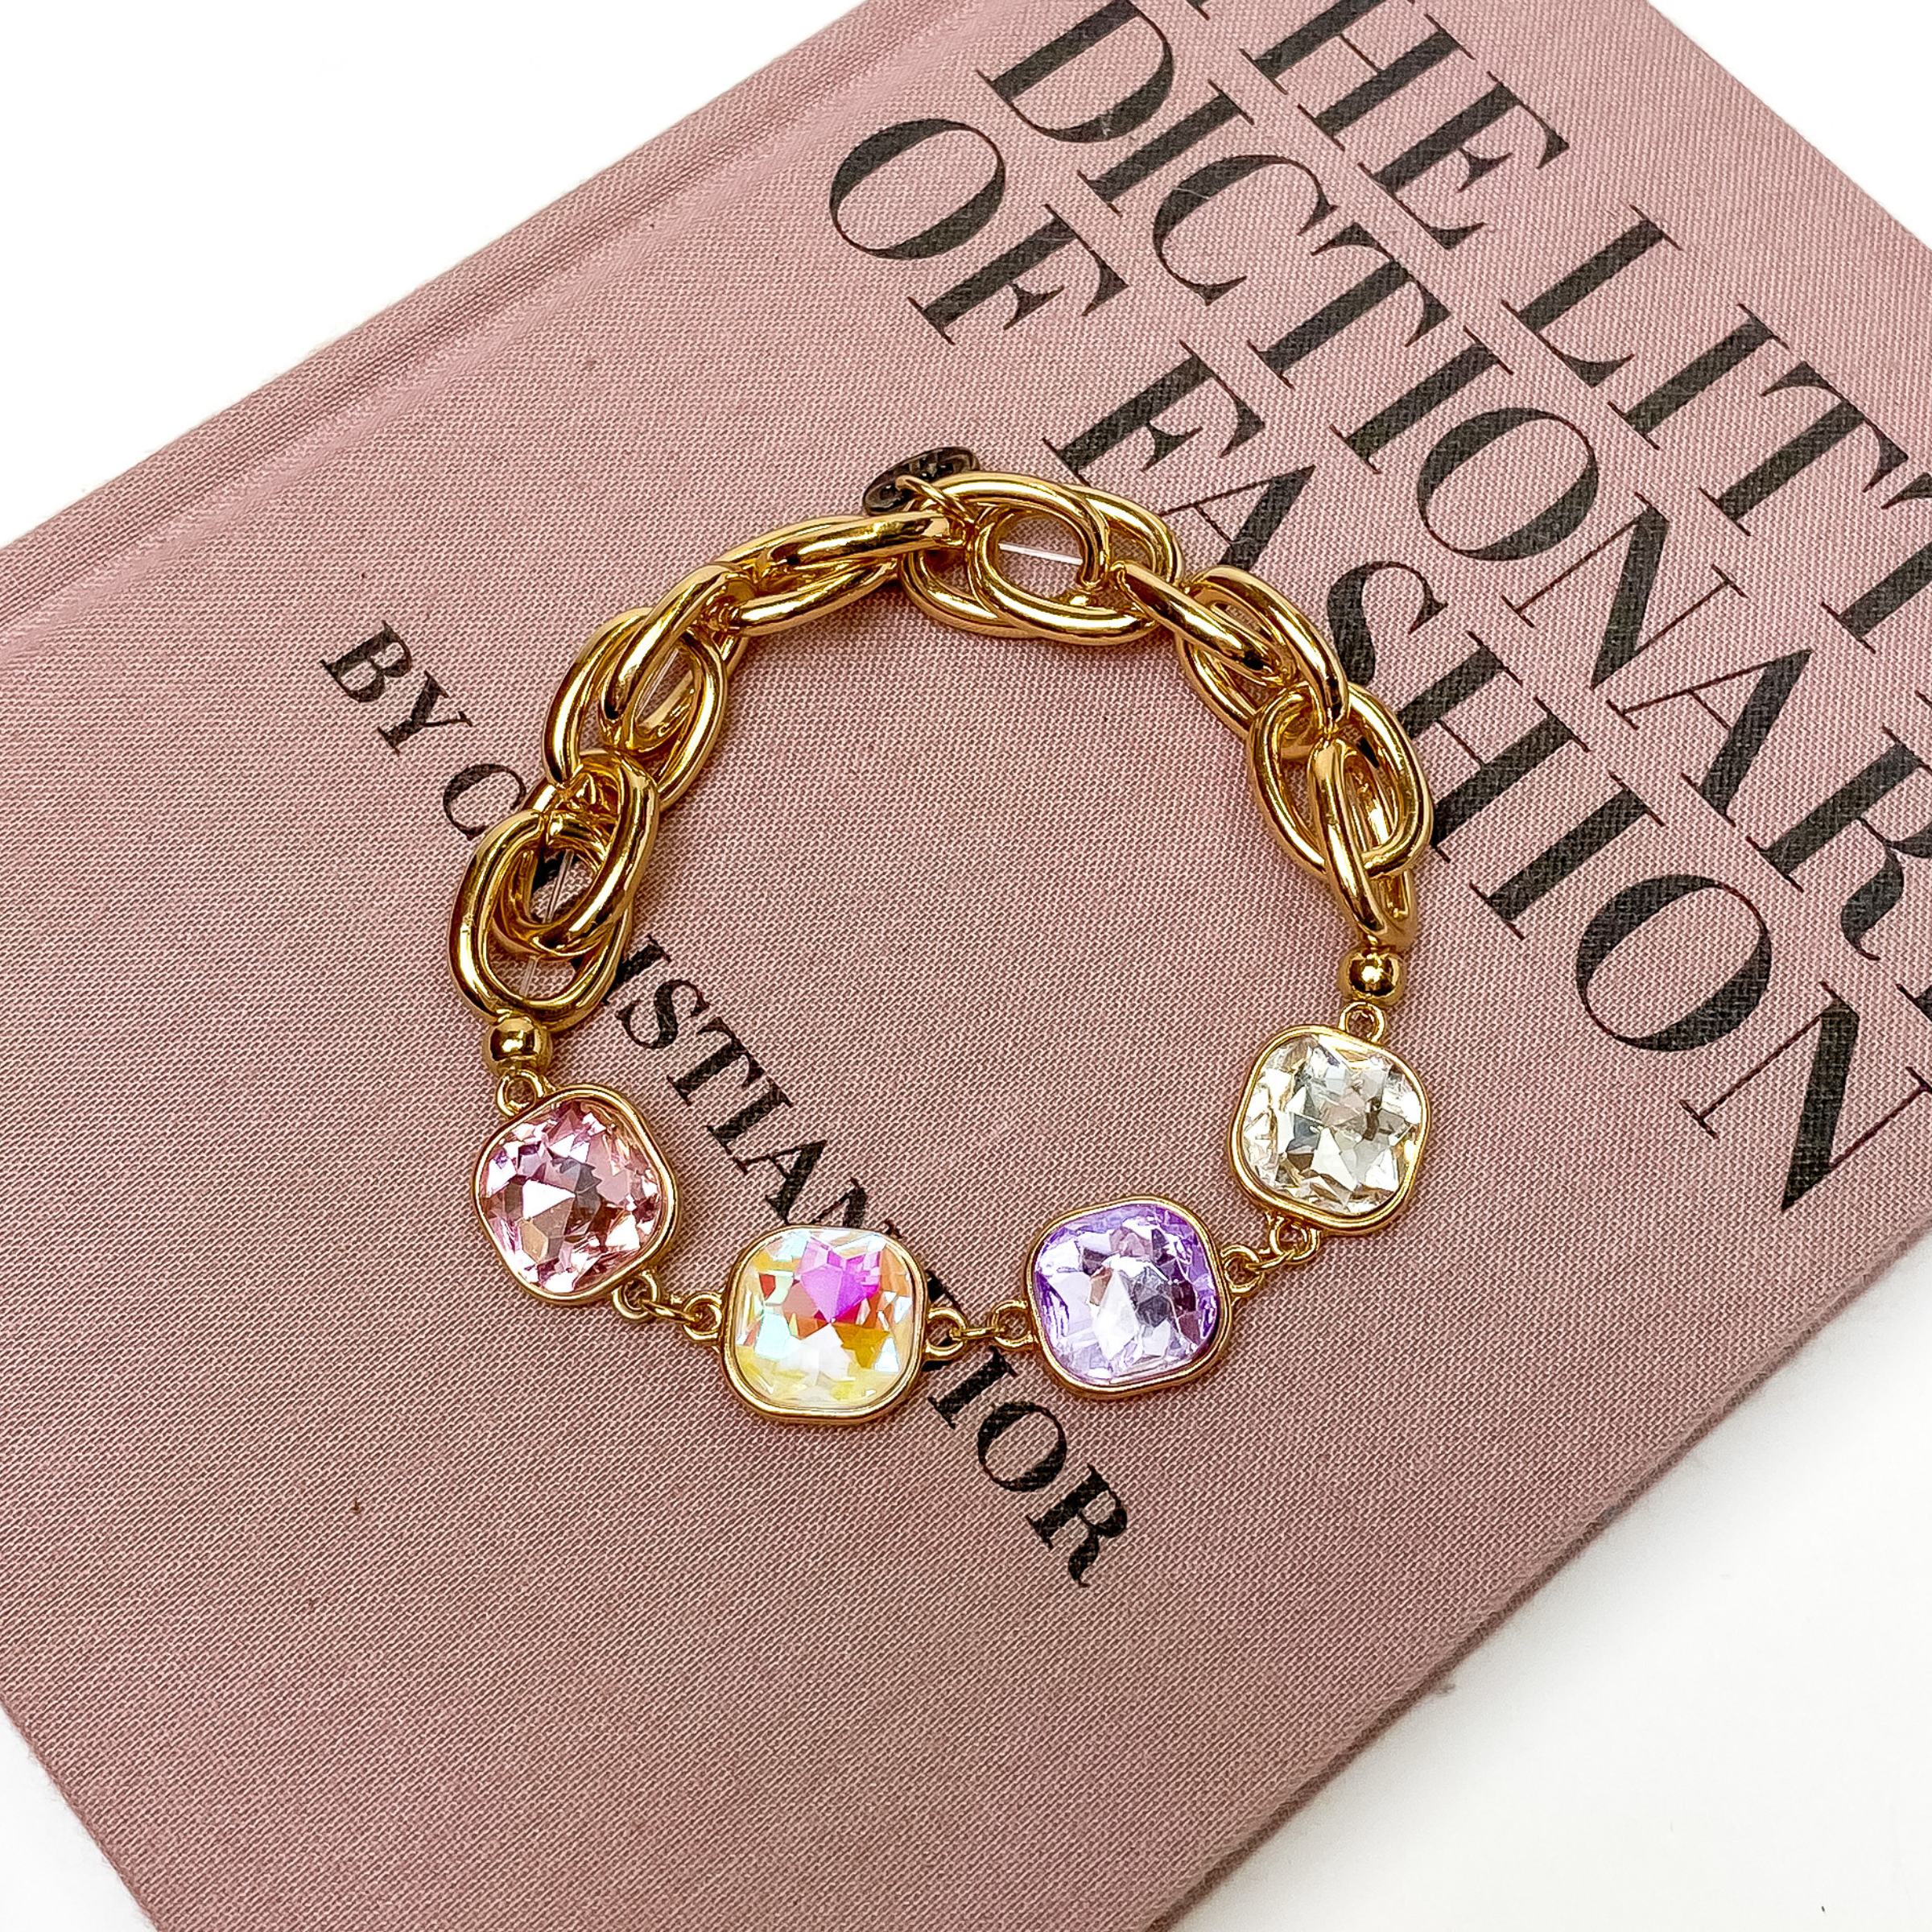 Gold Chain bracelet with four cushion cut crystals. These crystals come in light pink, opal ab, lavender, and clear. This bracelet is pictured on a mauve colored book on a white background. 